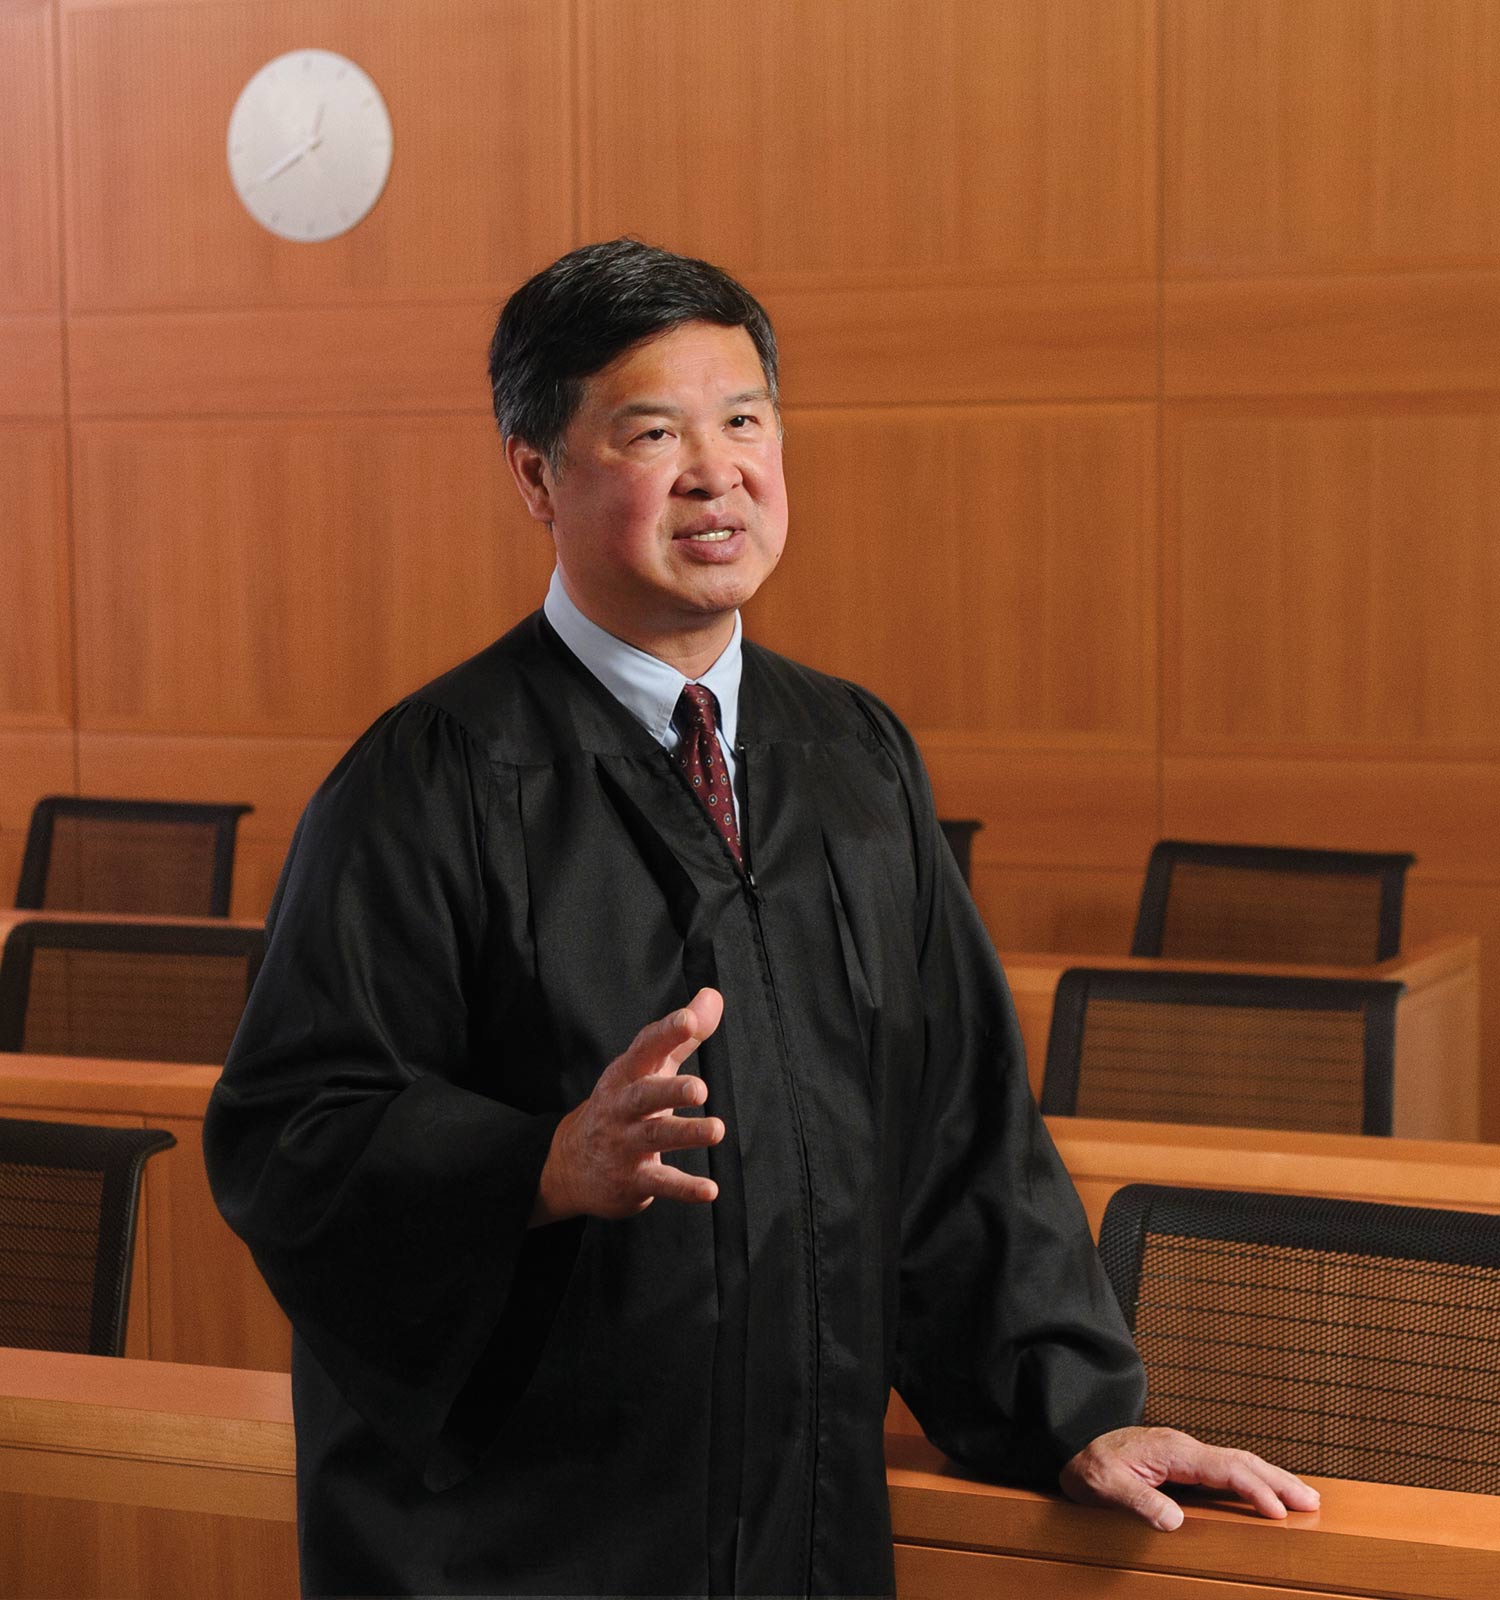 portrait of Denny Chin in a courtroom wearing robes